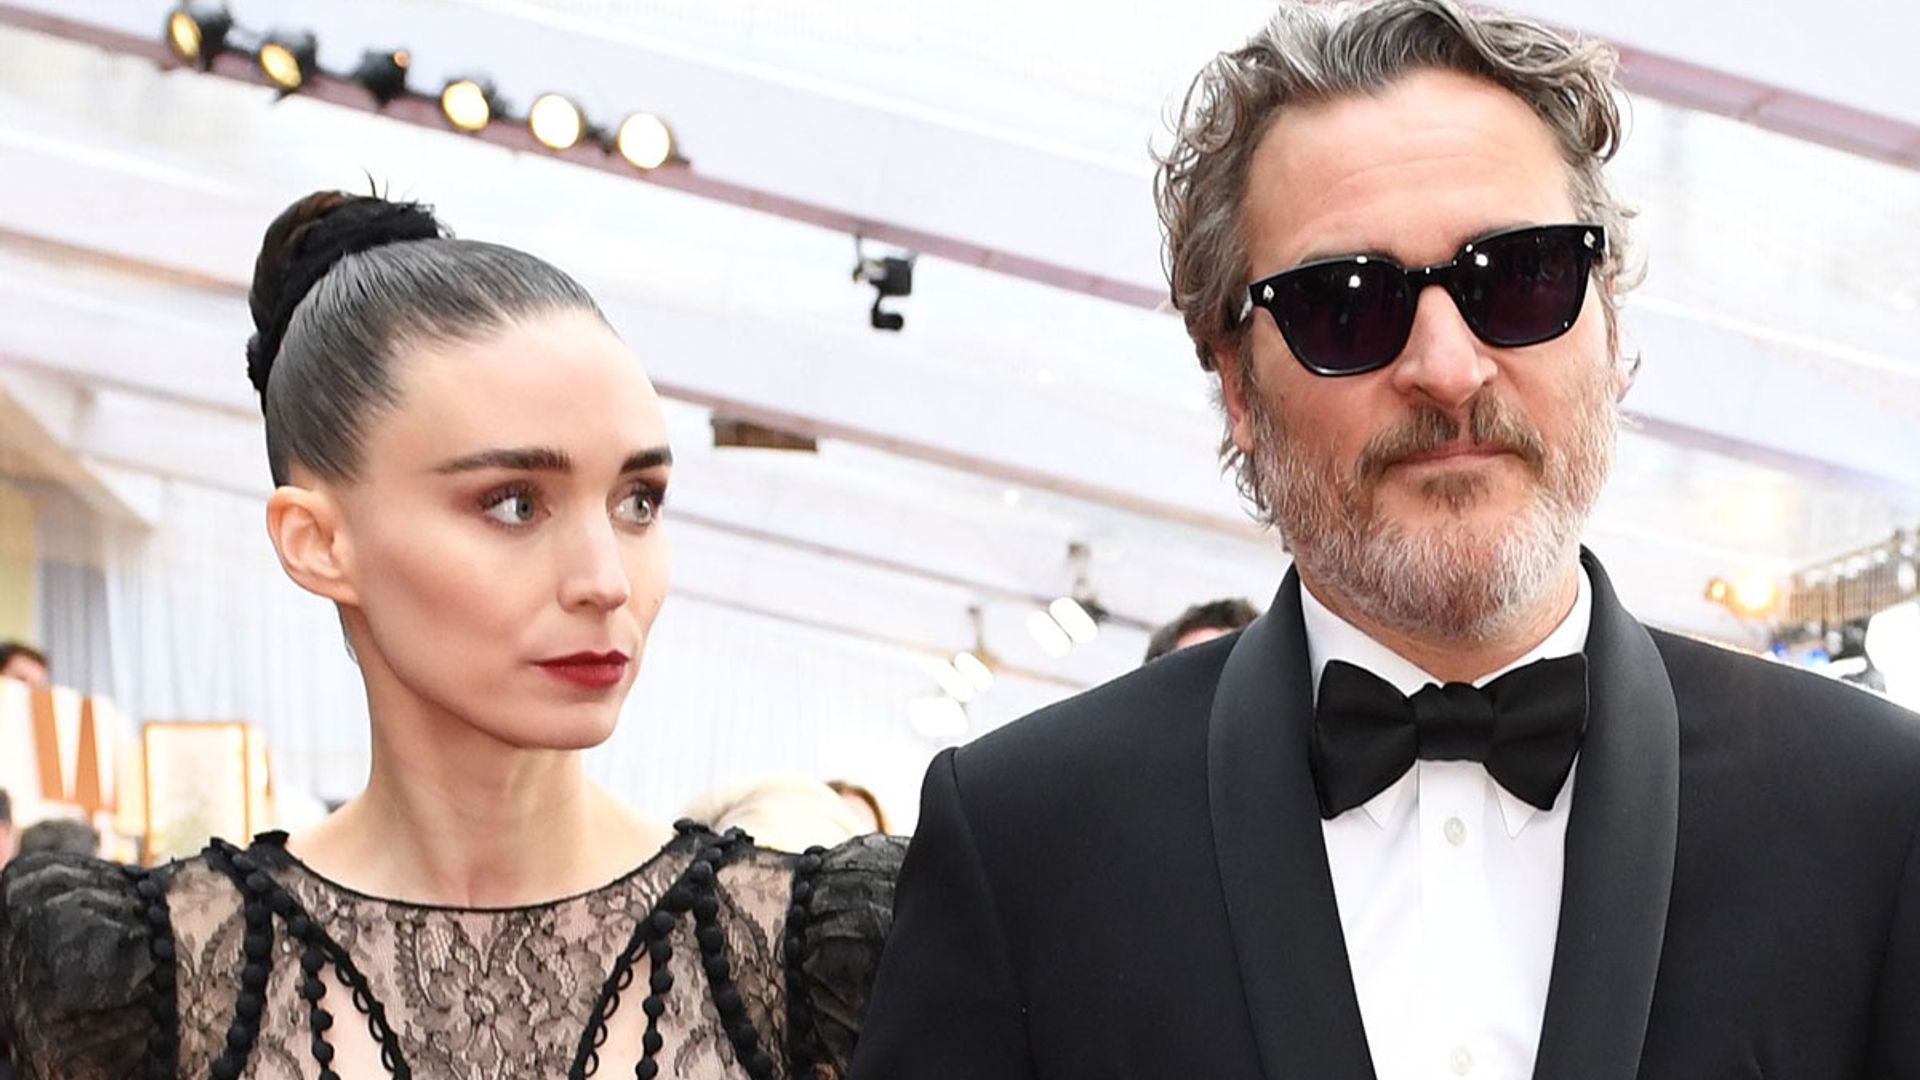 Joaquin Phoenix and Rooney Mara confirm birth of their baby son in heartfelt message